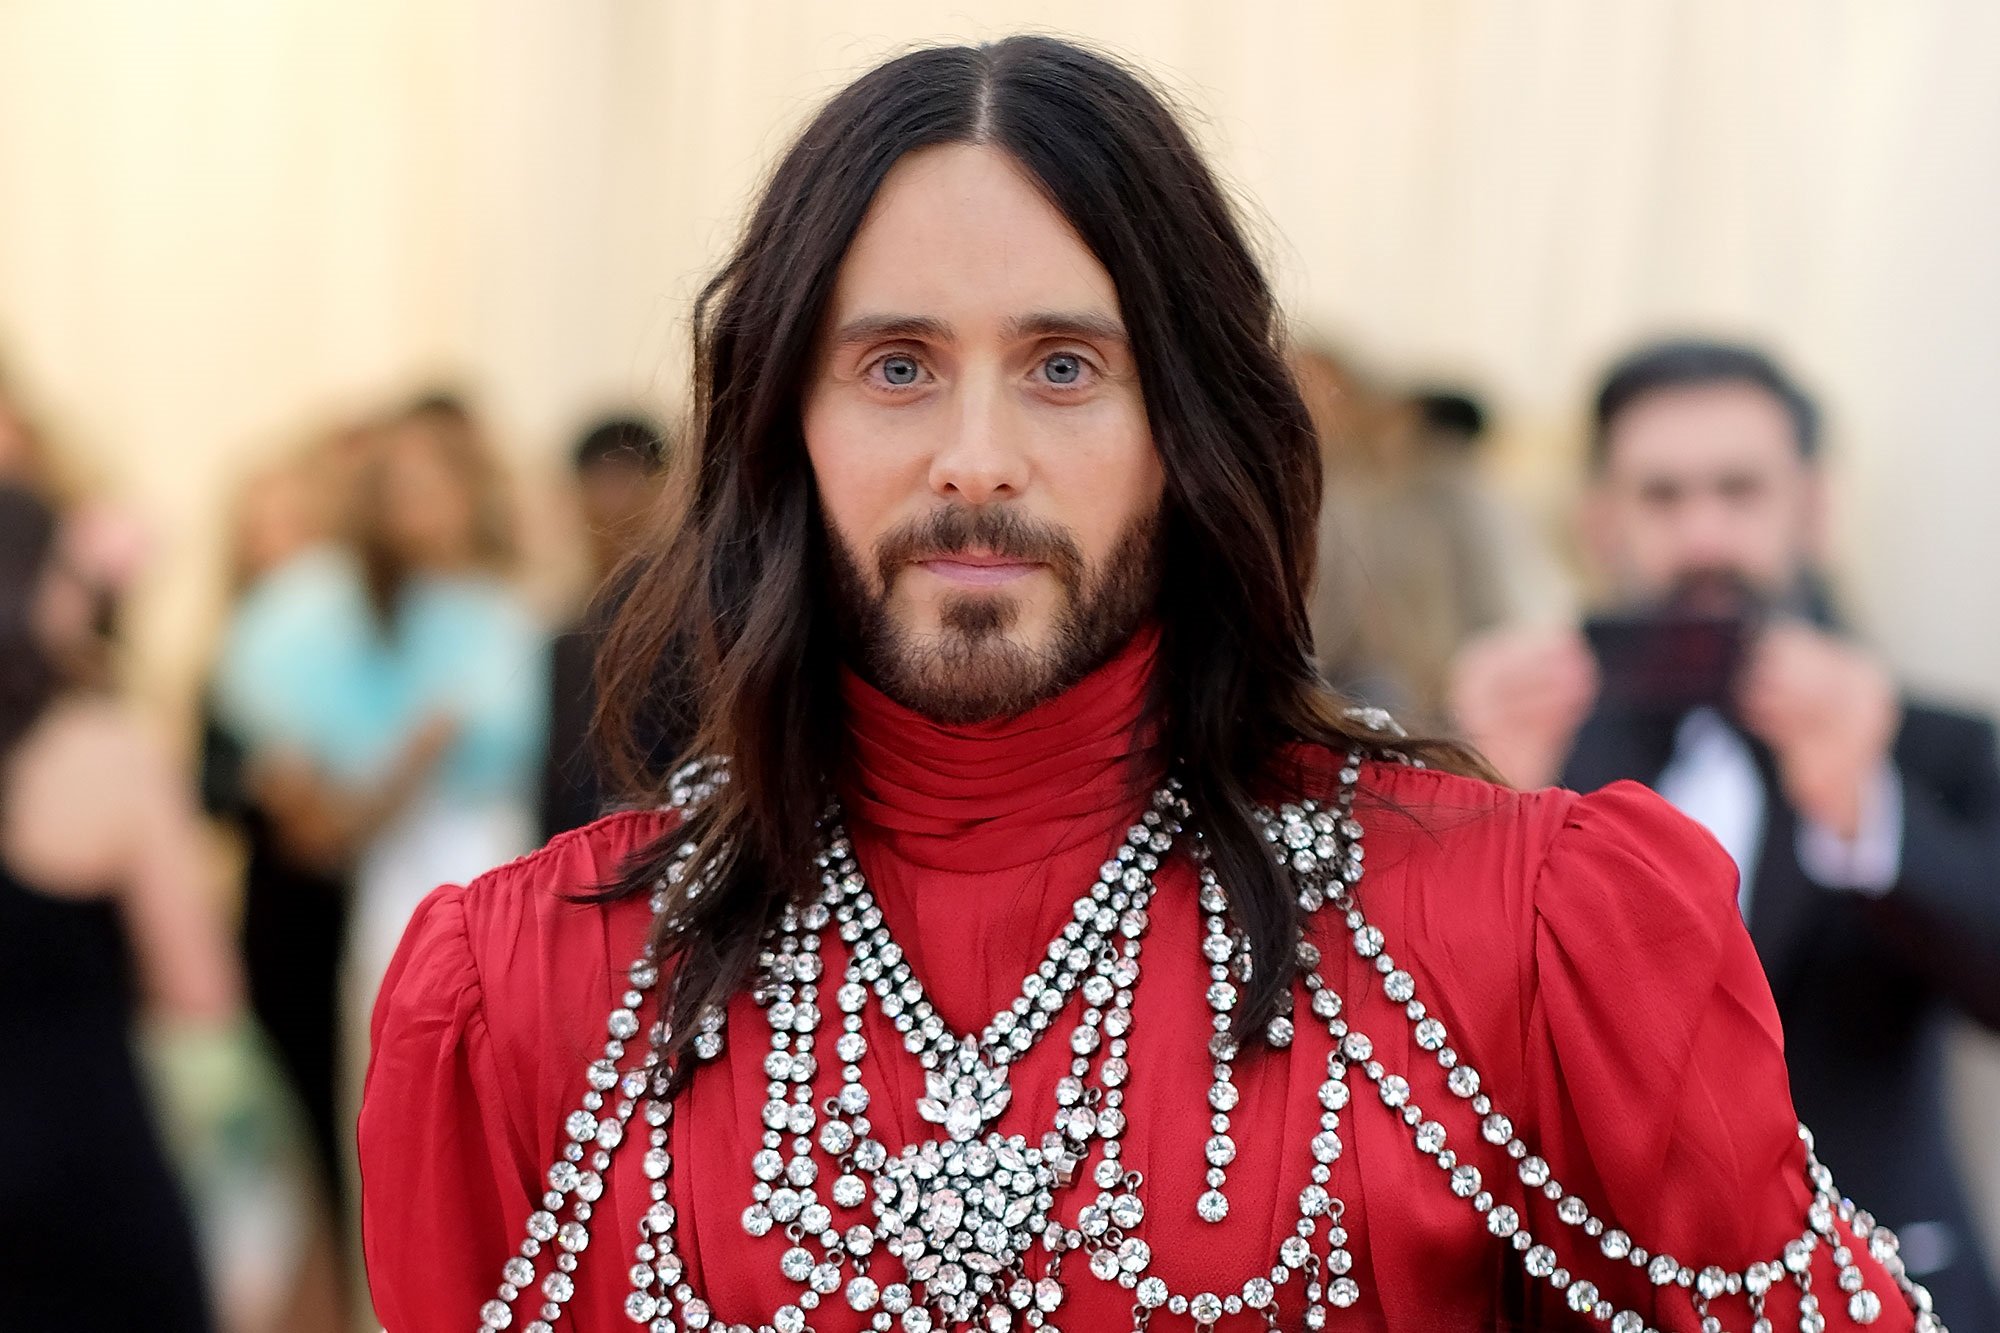 jared leto just found out about coronavirus